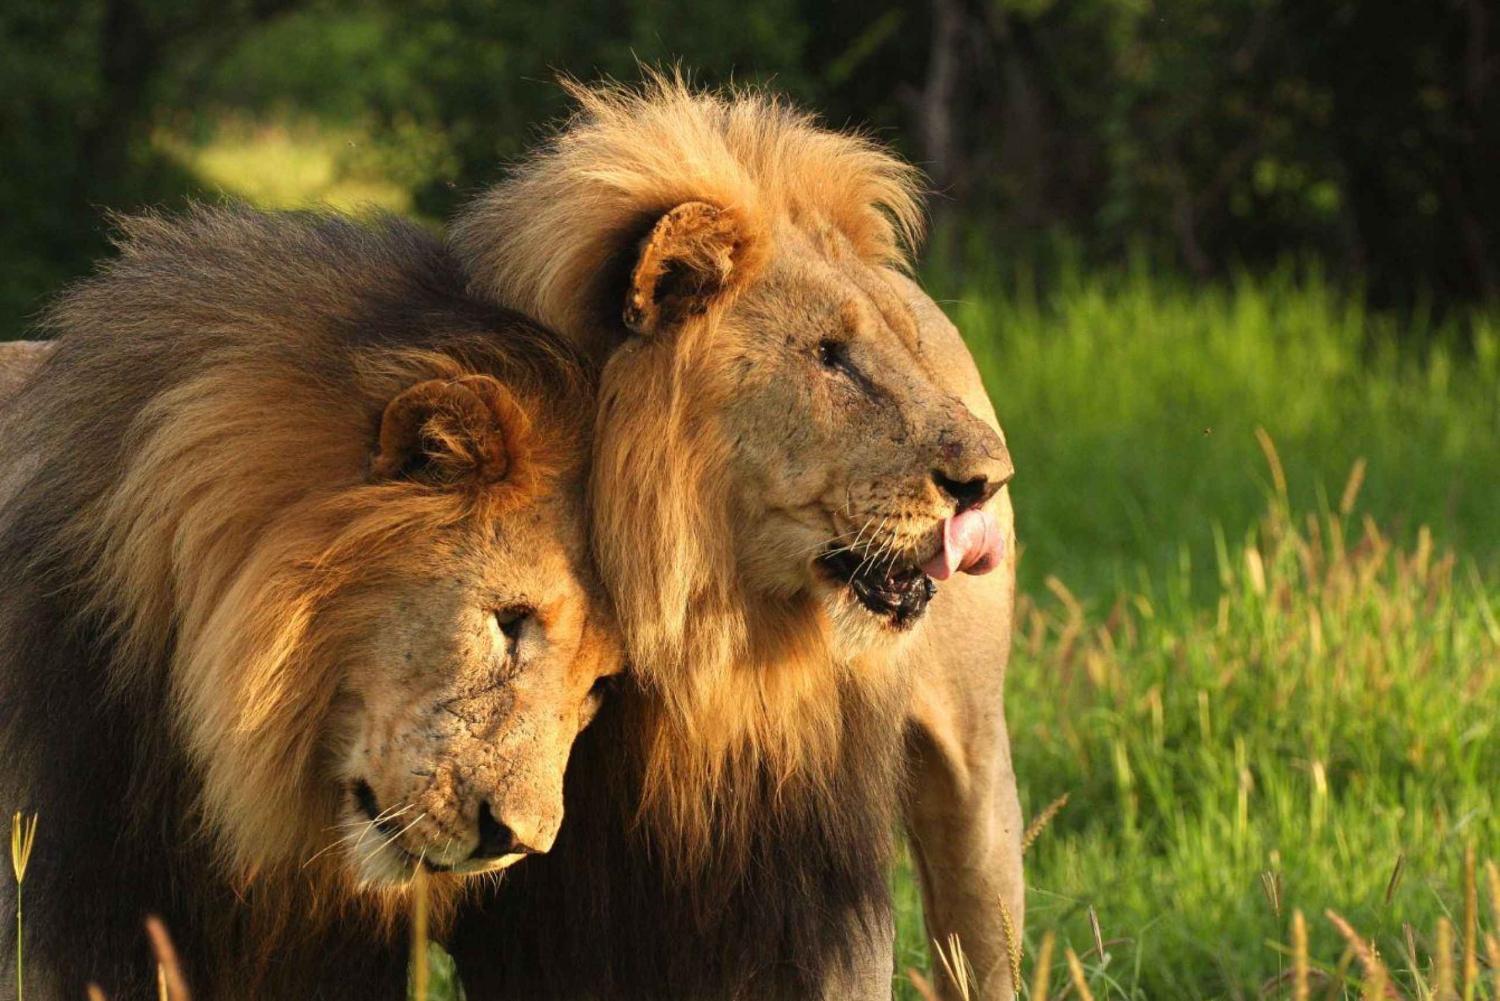 Tala Game Reserve & Natal Lion Park 1/2 Day Tour from Durban